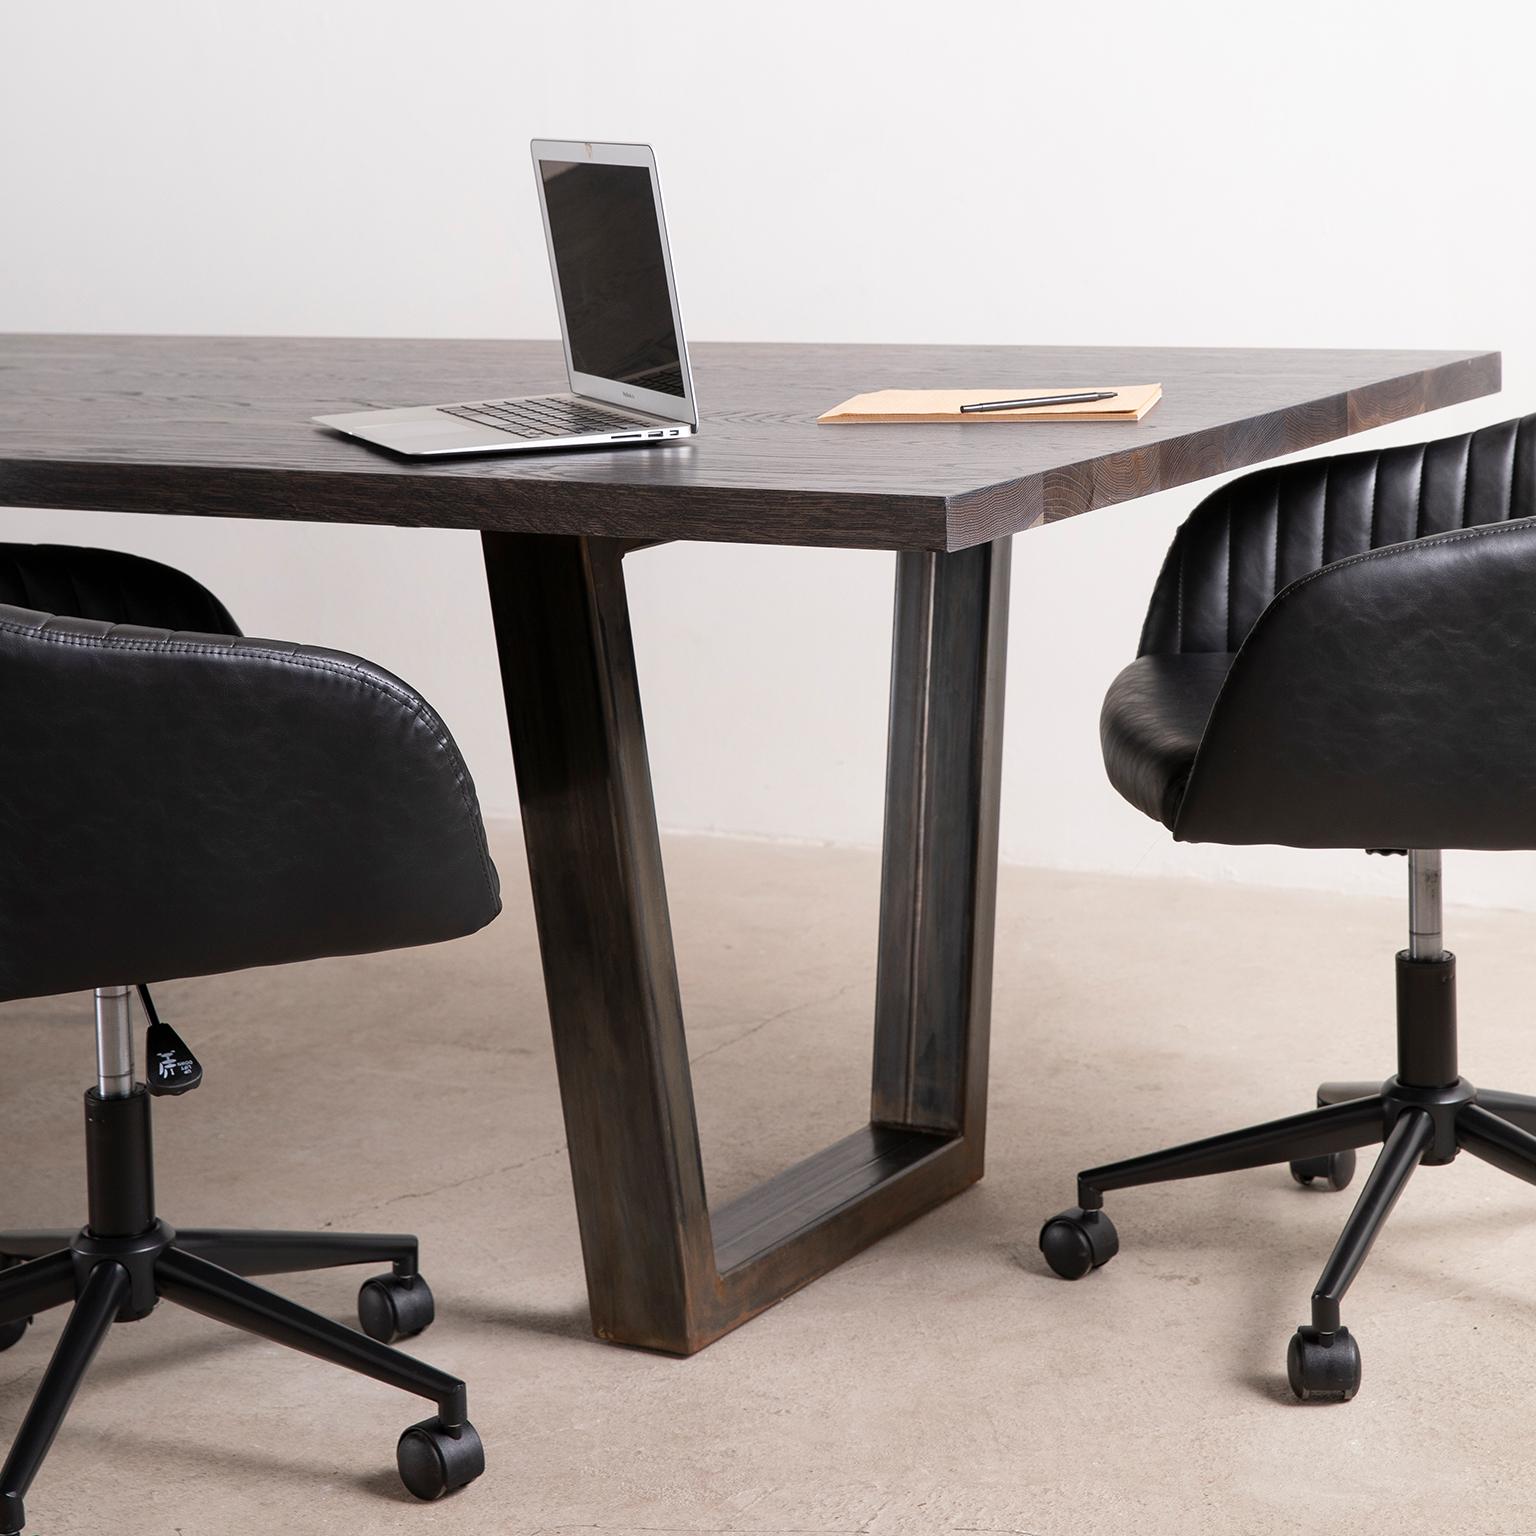 The Taper Conference Table is a functional piece of furniture designed for the modern office environment. The table’s sturdy tapered legs and sleek North American hardwood top give it a tasteful contemporary look. The tapered legs also provide